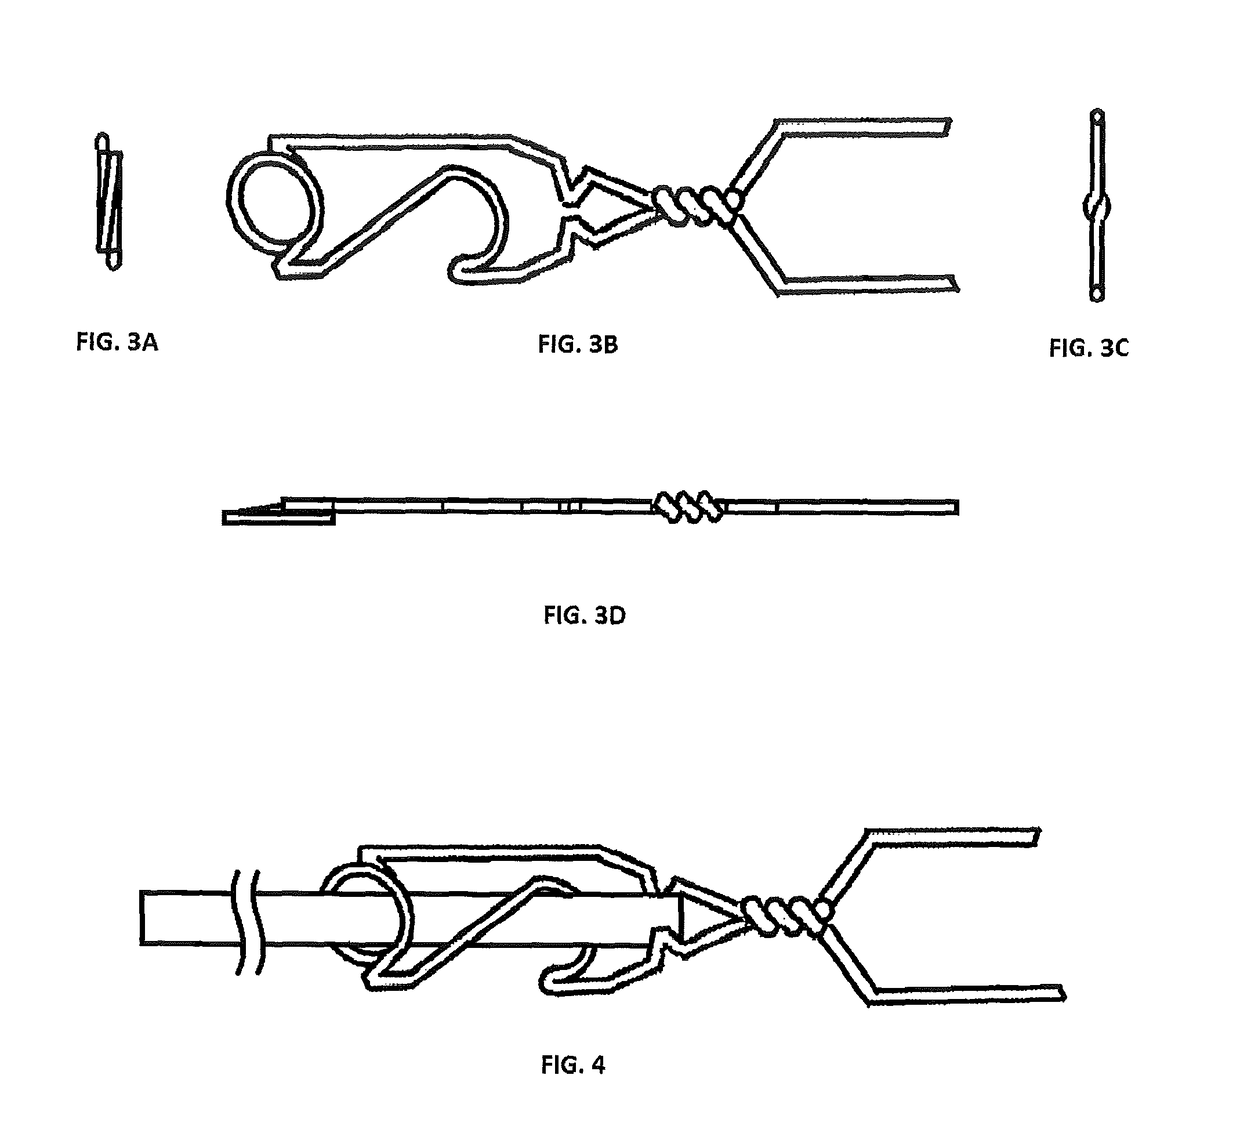 Device and method for removable utensil that attaches to handle of variable sizes